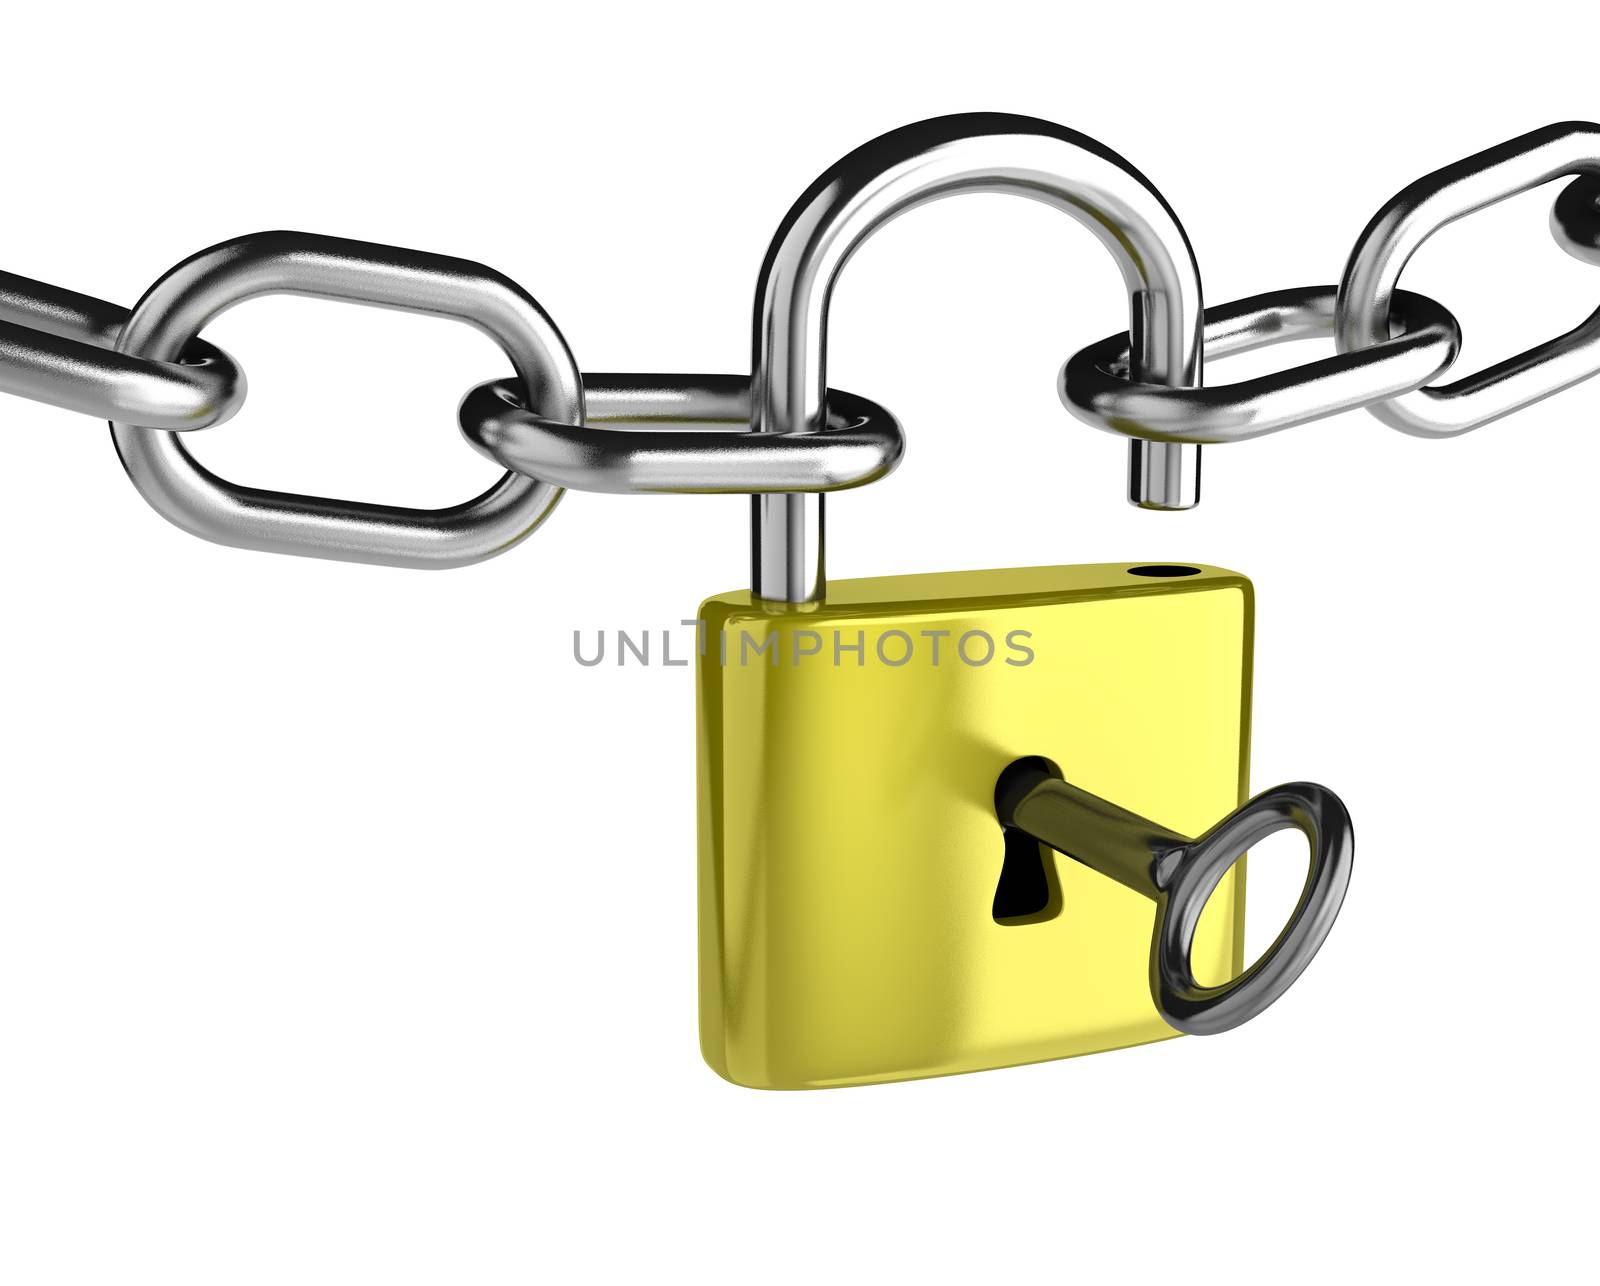 Chain with a Key that is Opening a Padlock on White Background